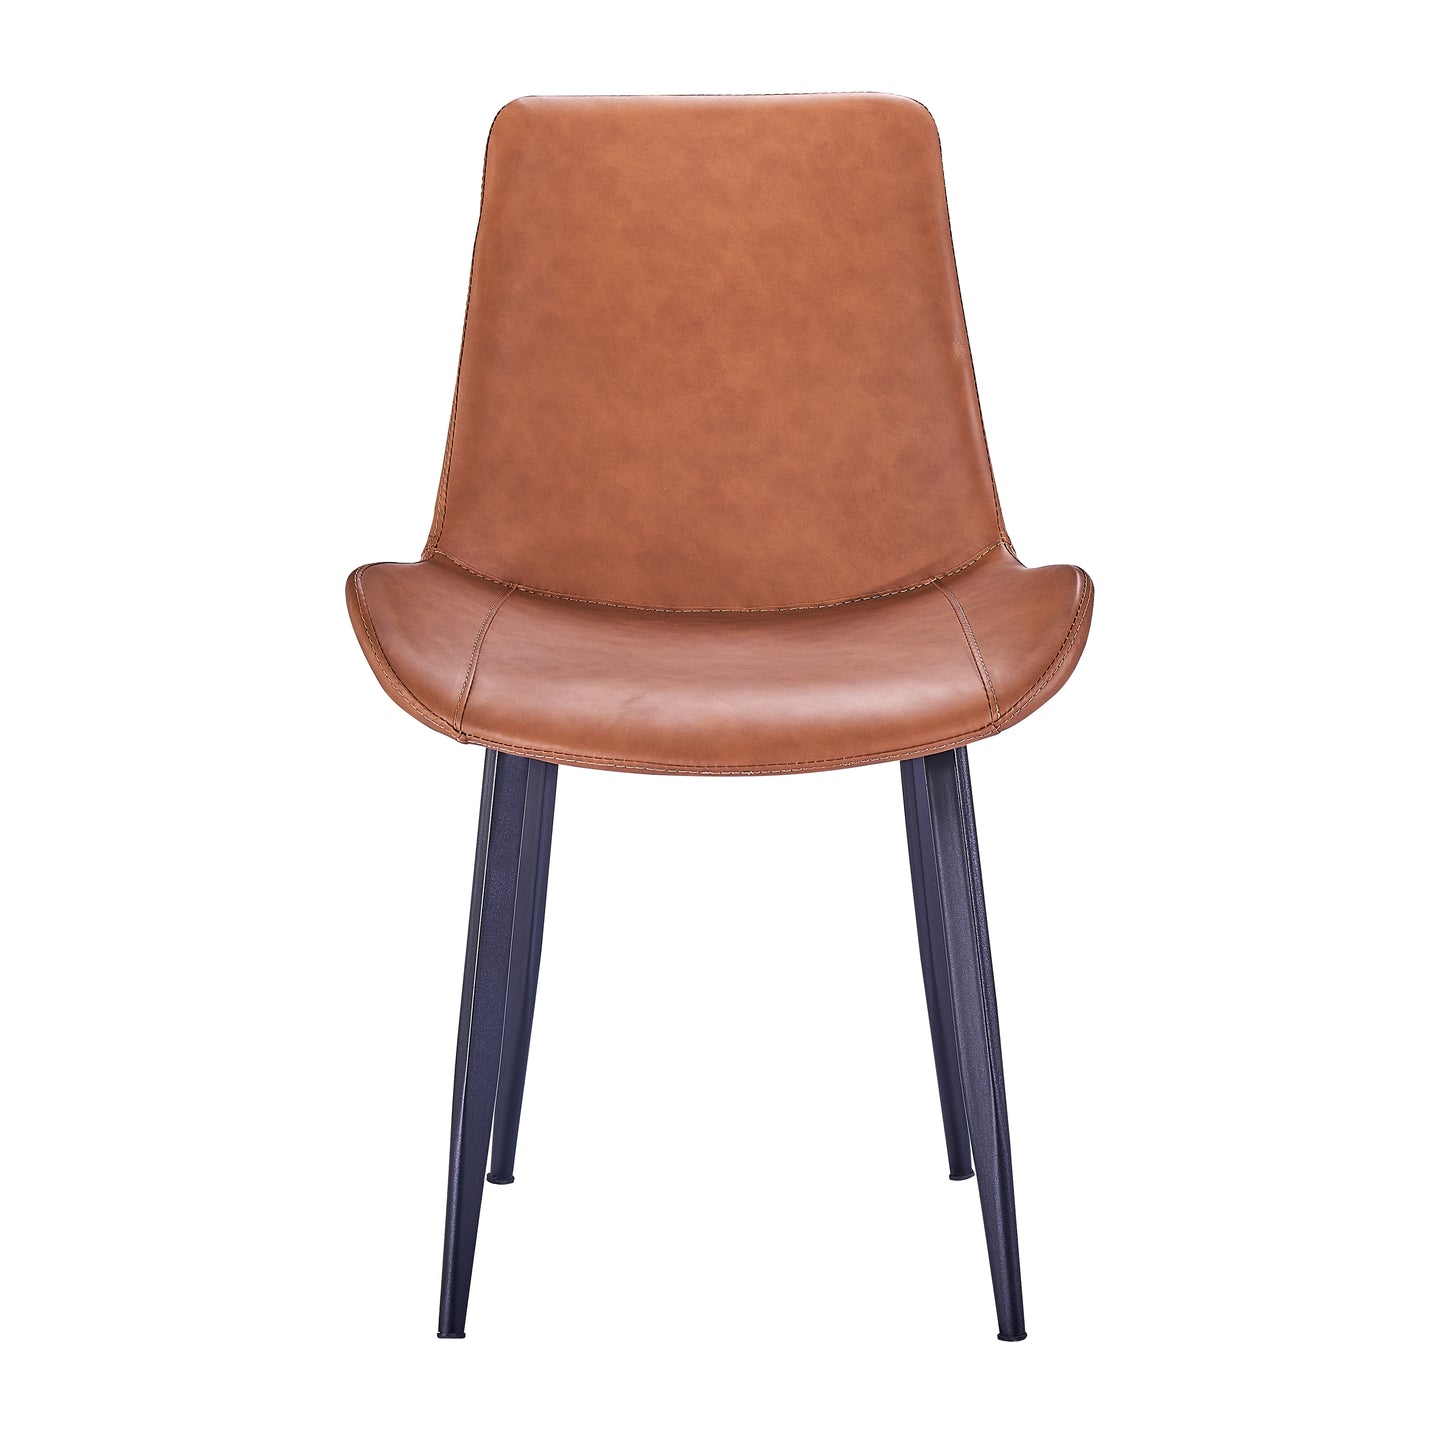 Criterion Mendy Dining Chair 840mm PU Seat, Carbon Steel Frame Tan